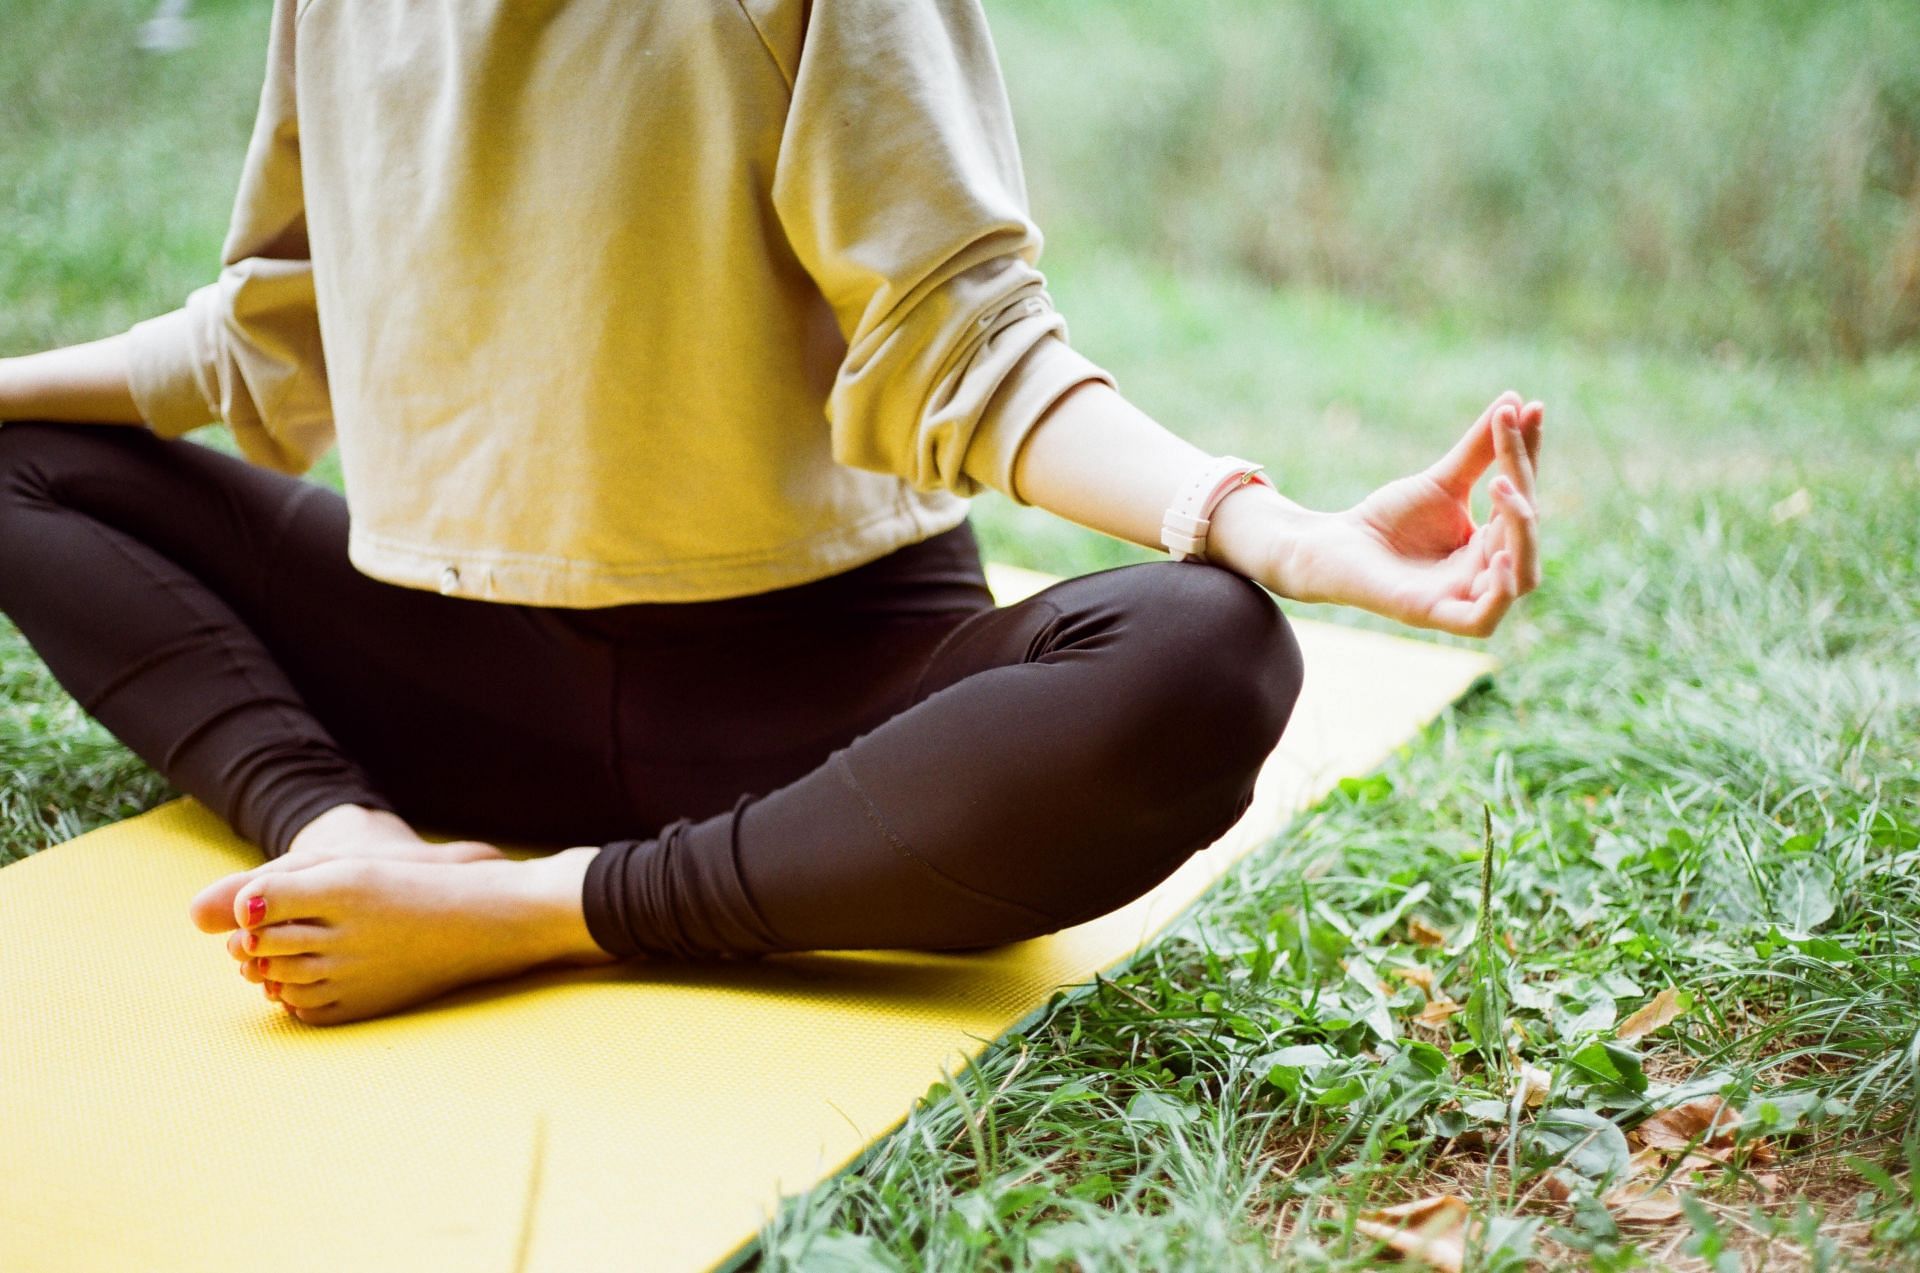 30 day yoga challenges to improve your overall fitness. (Image via Unsplash/Hope Film Photo)